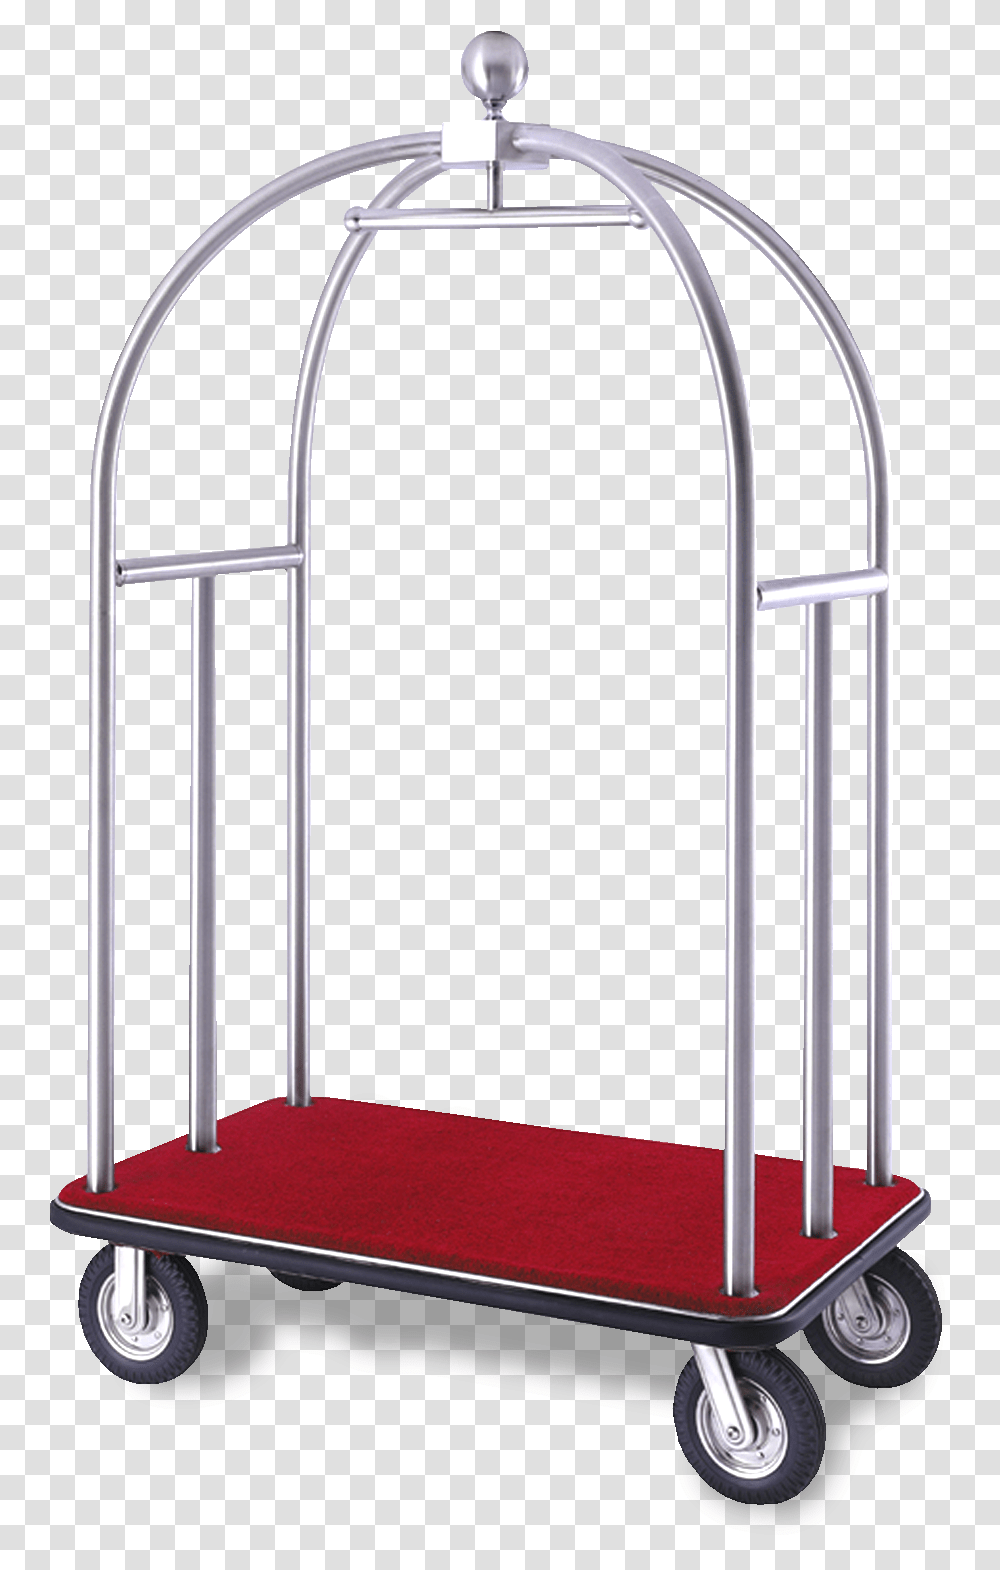 Luggage Trolley Carttec Hotel Luggage Trolley, Sink Faucet, Architecture, Building, Arched Transparent Png